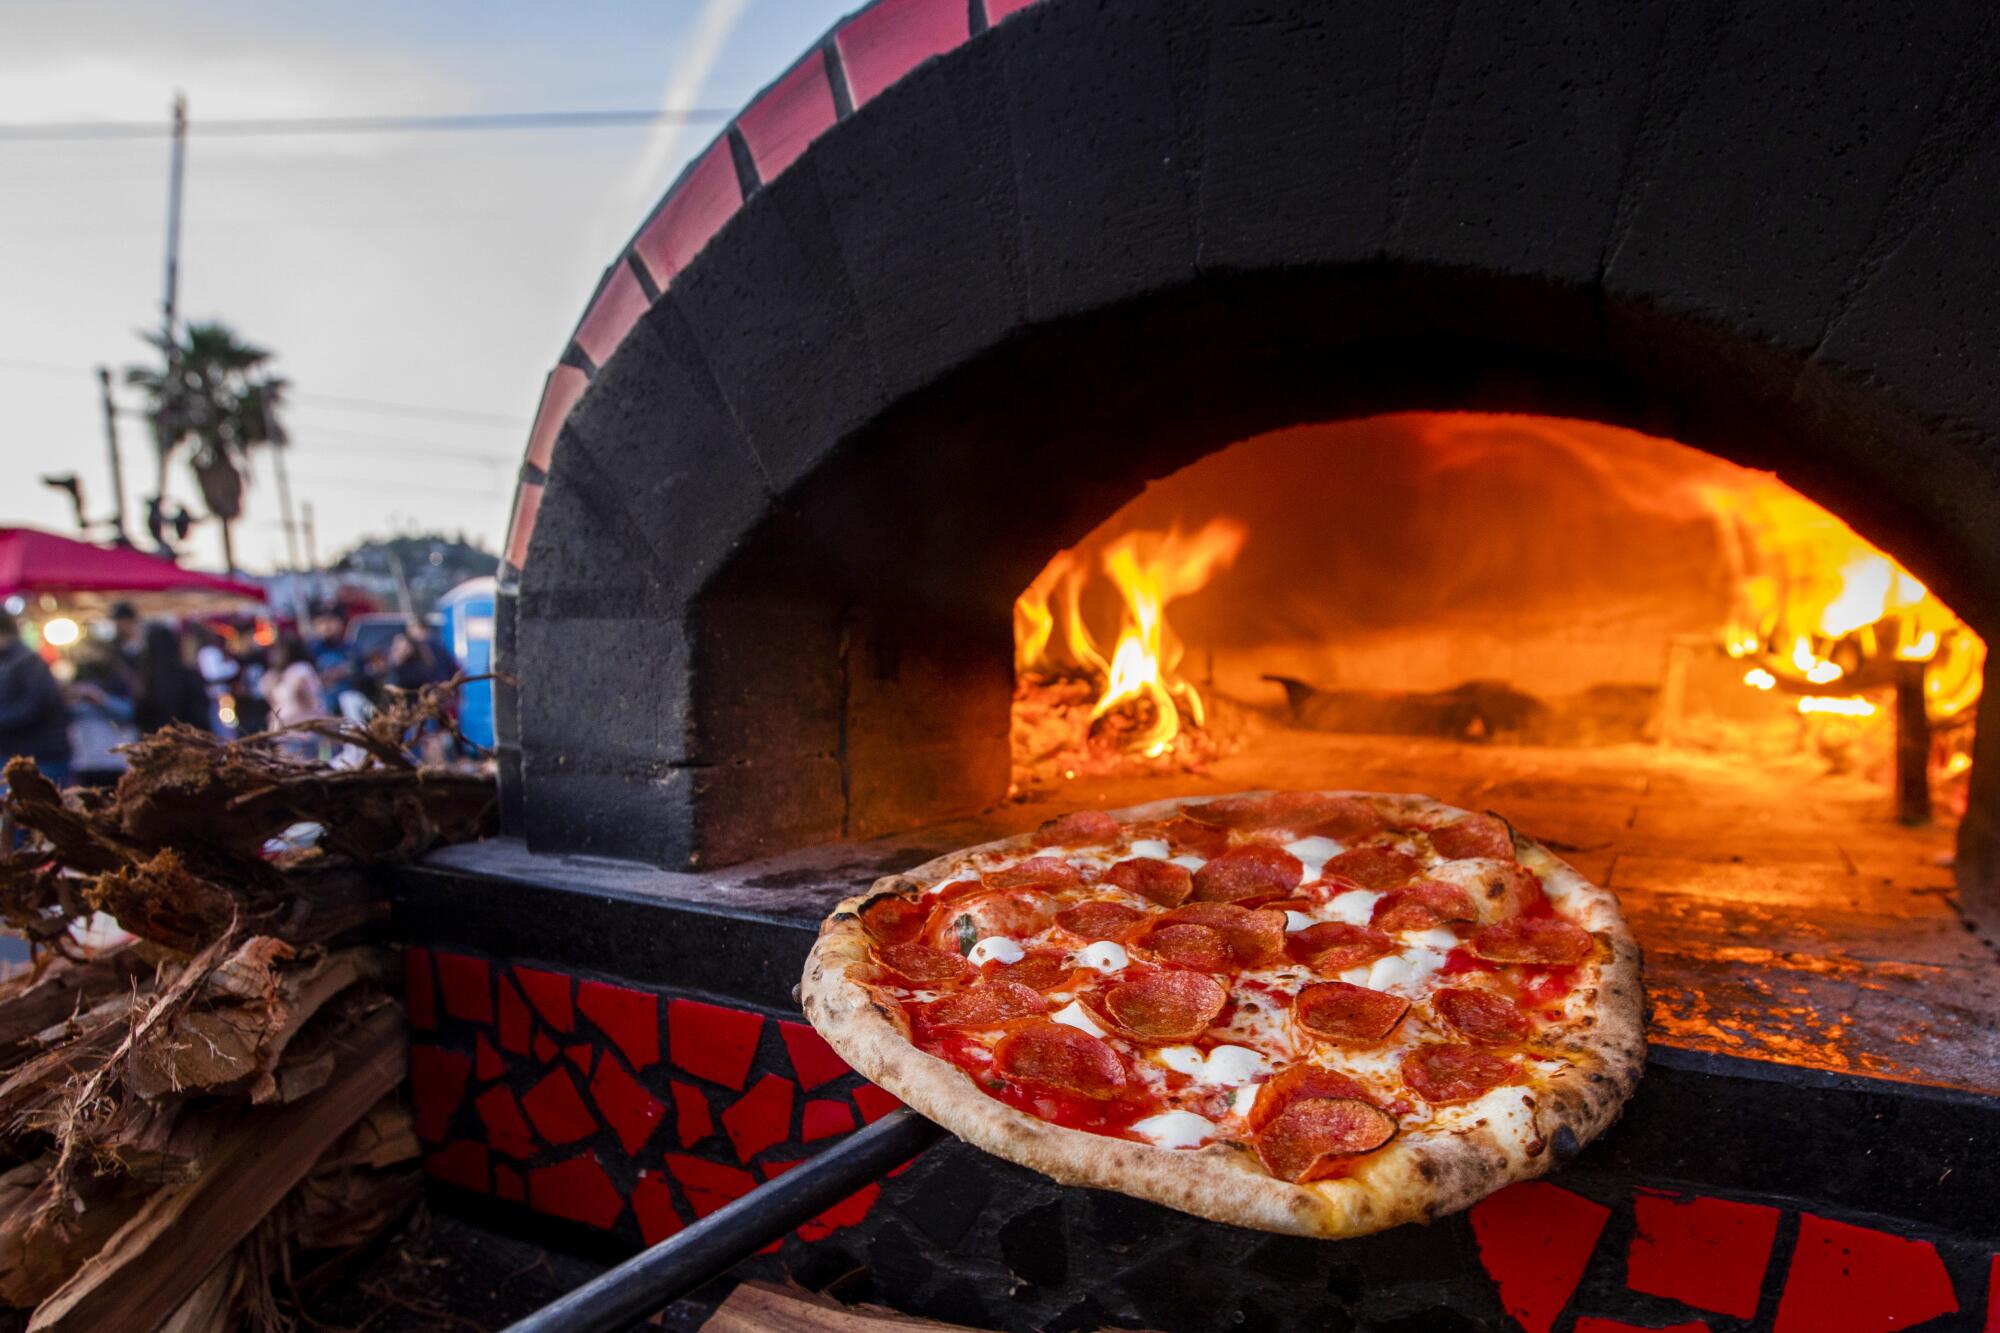 A pizza emerges from a wood-fired oven at an outdoor market.